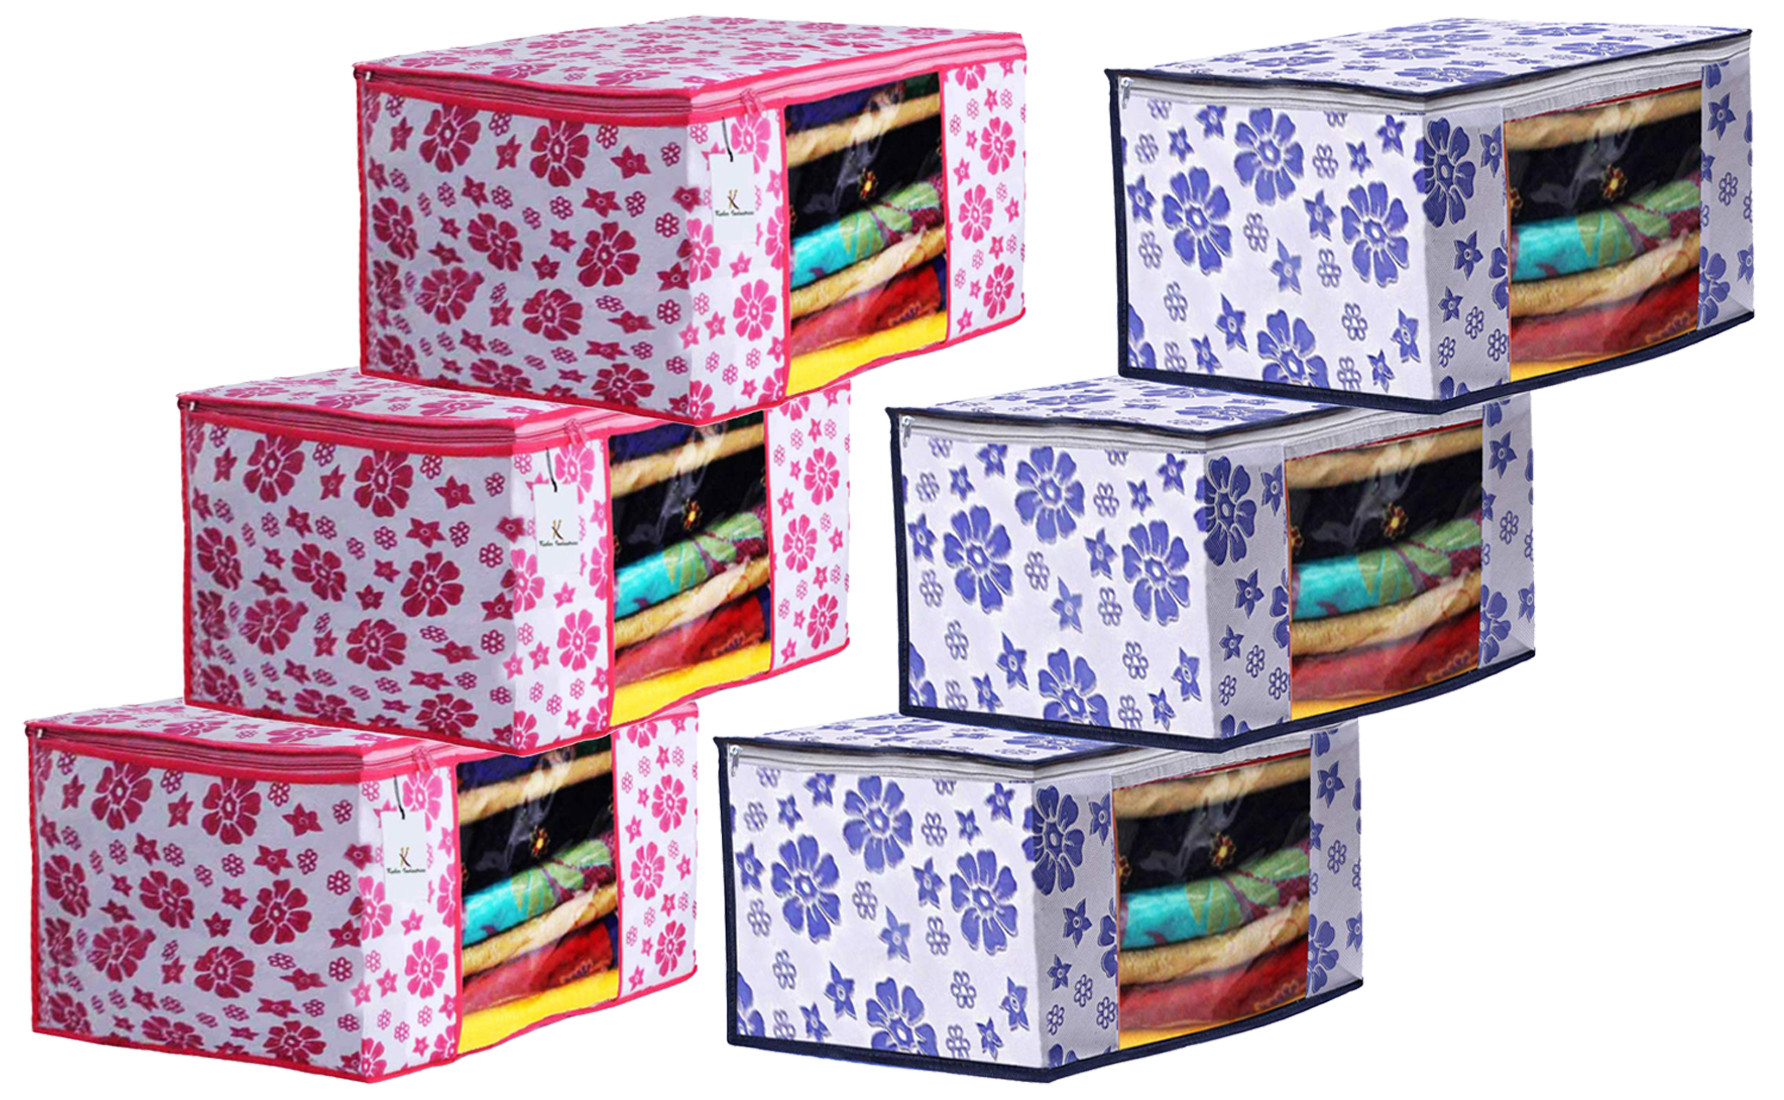 Kuber Industries Flower Design Non Woven Fabric Saree Cover Set with Transparent Window, Extra Large, Pink & Blue -CTKTC40763